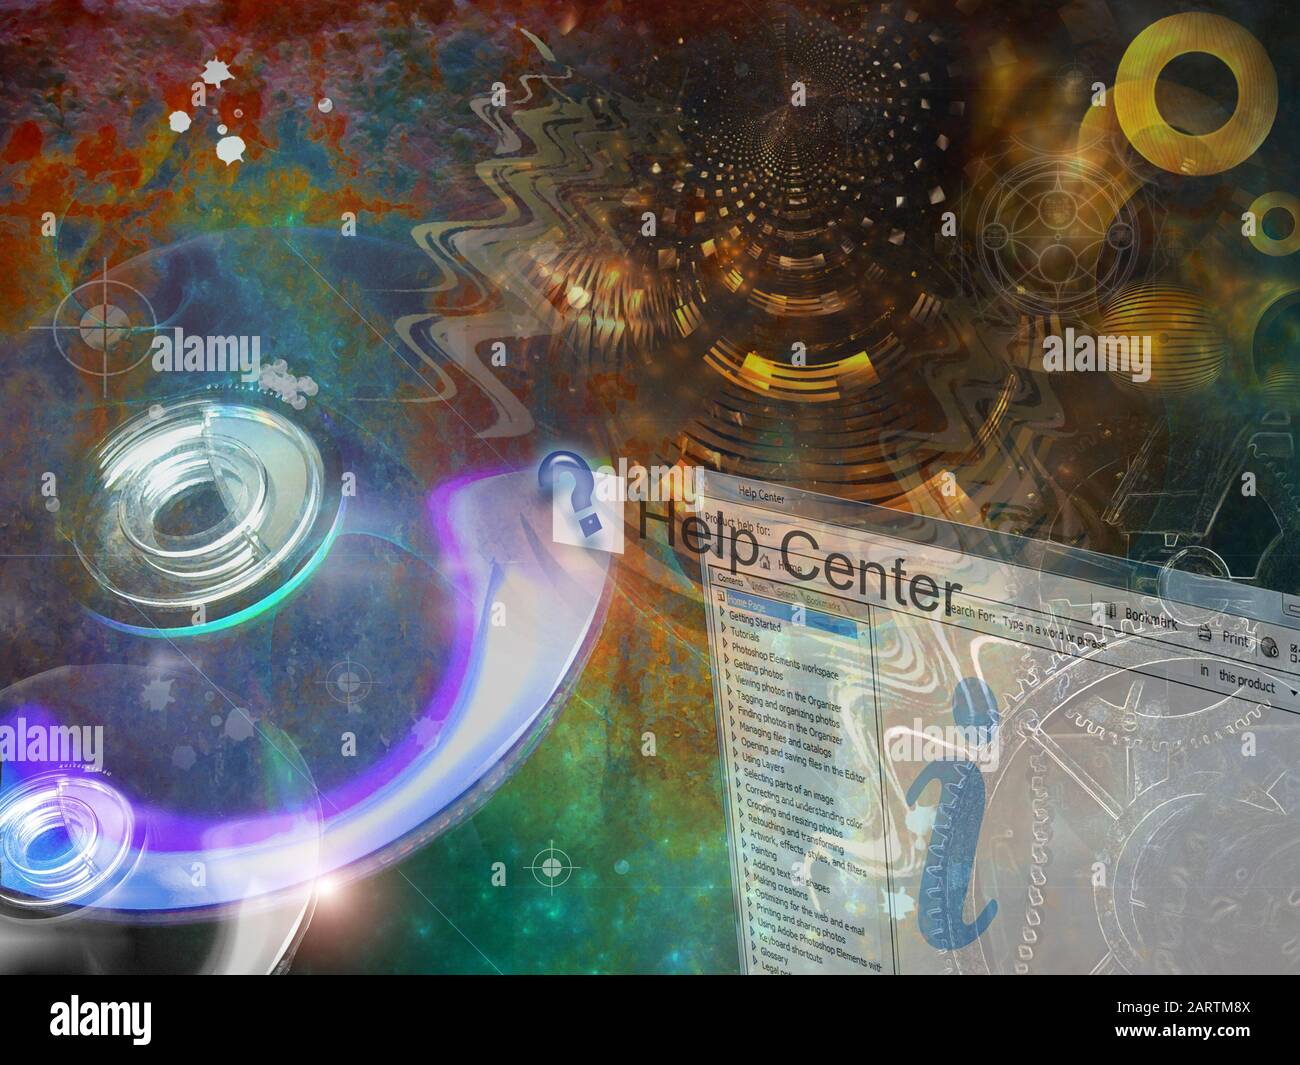 Photomontage of Technology and Innovation relating to Help Center Stock Photo